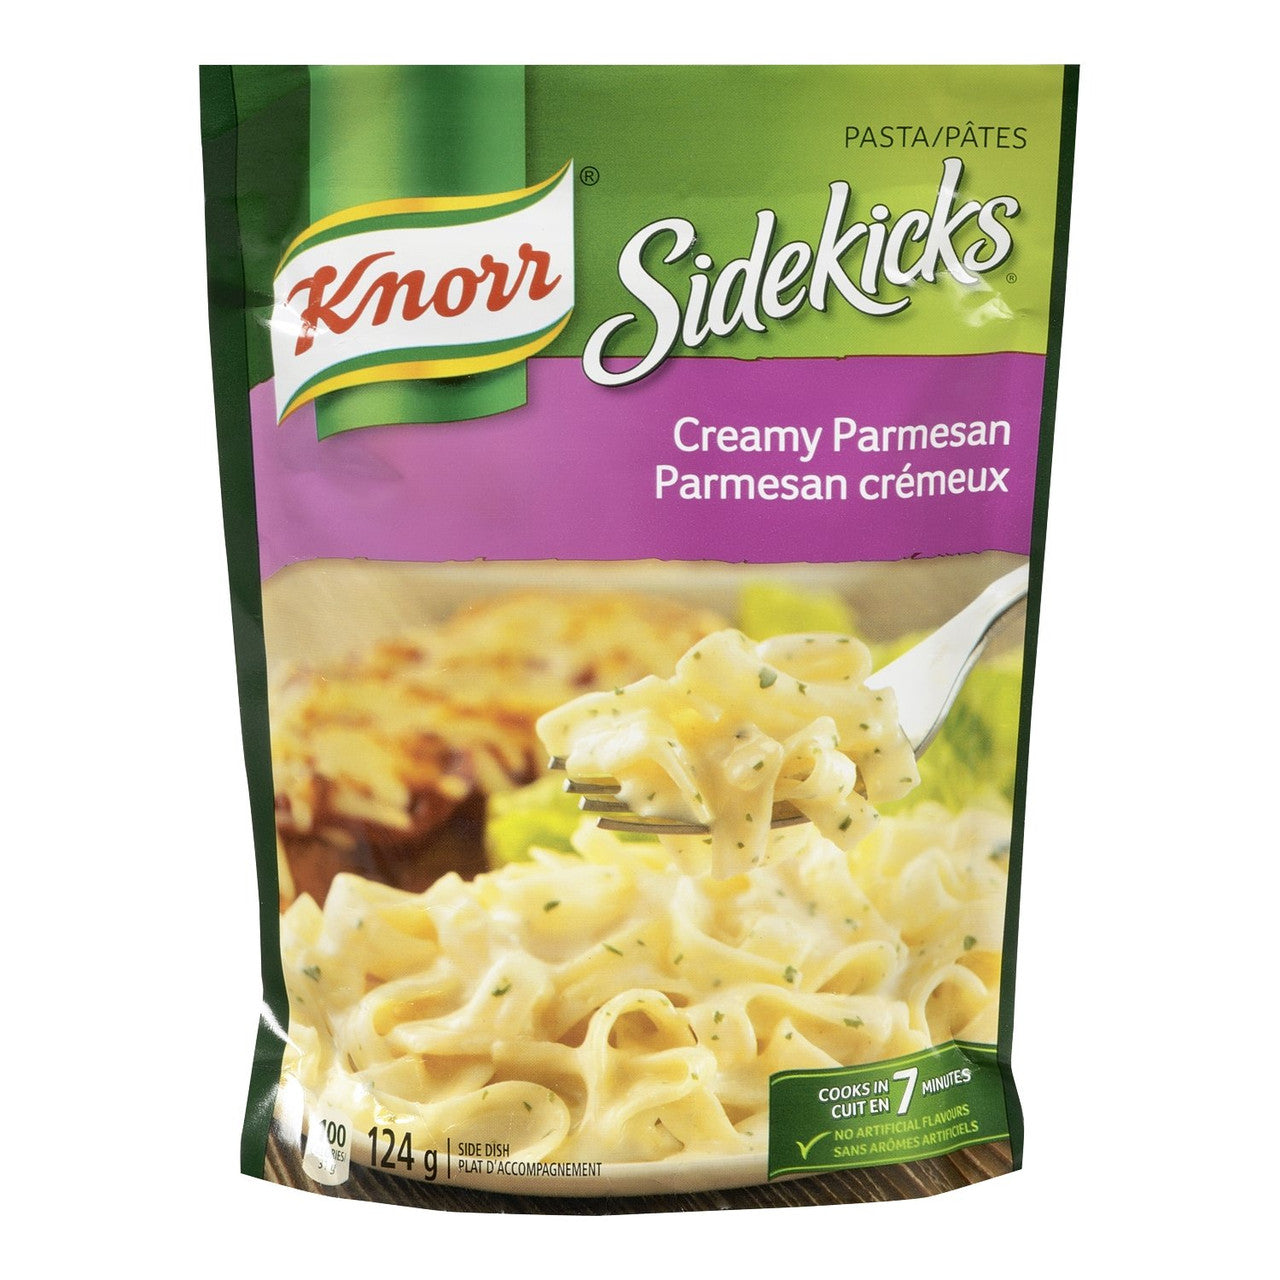 Knorr Sidekicks Creamy Parmesan Pasta 124g - Imported from Canada